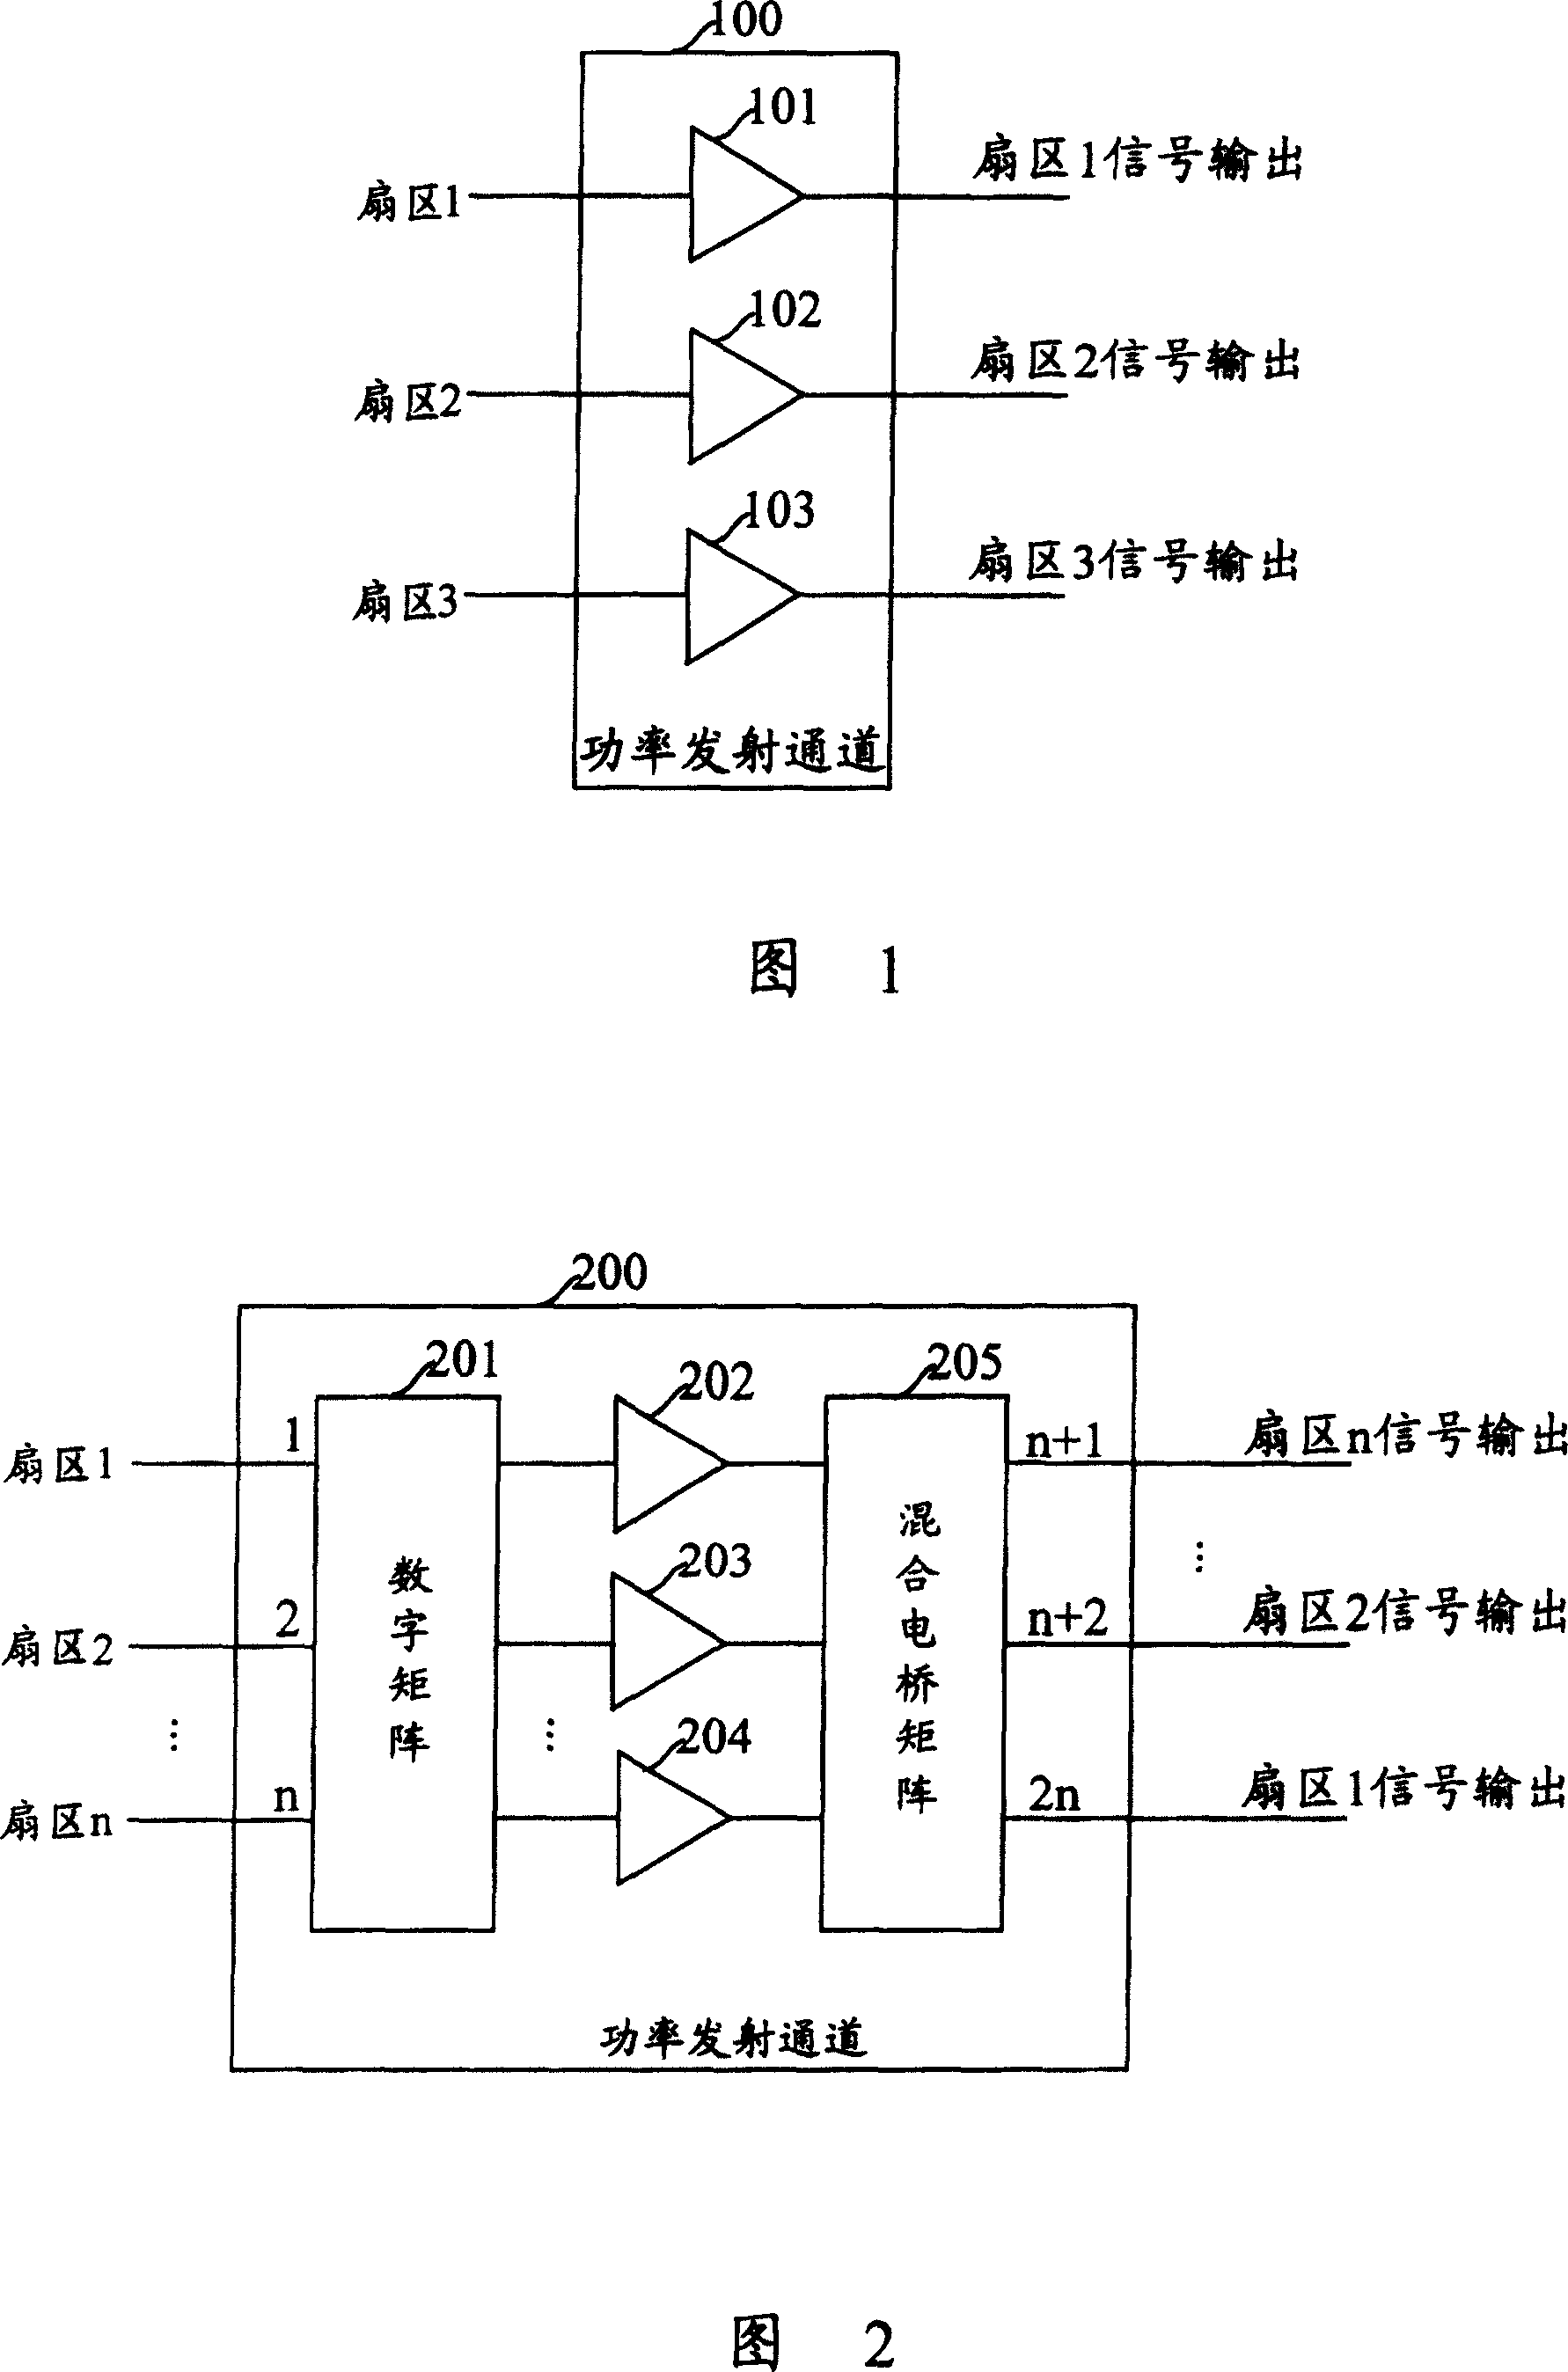 Method and apparatus for transmitting signal via base station power emission channel